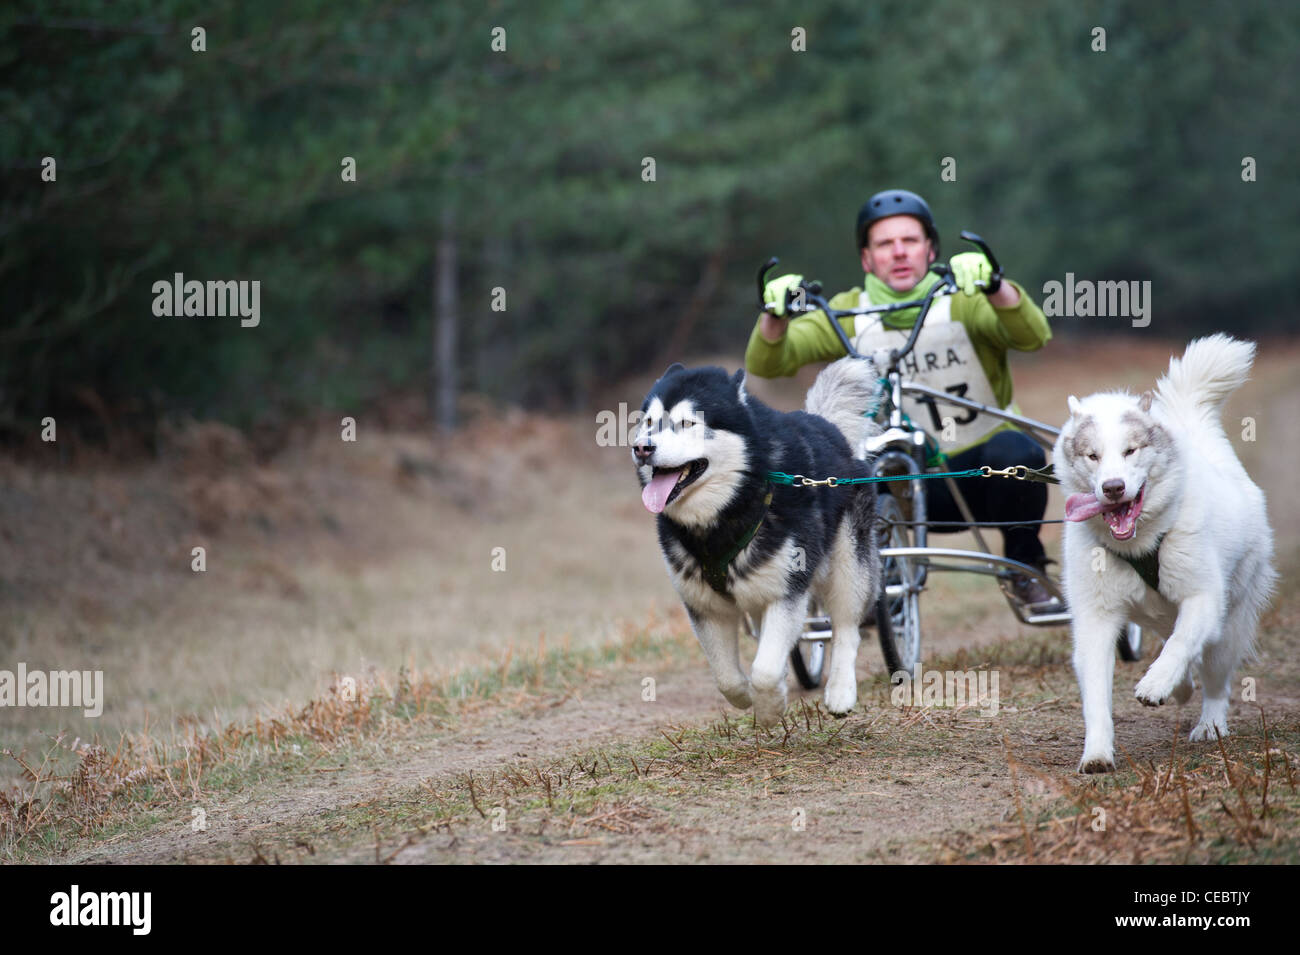 British Siberian Husky Racing Association event held at Elveden Forest, Suffolk, UK. Two dog teams competing on a timed lap. Stock Photo